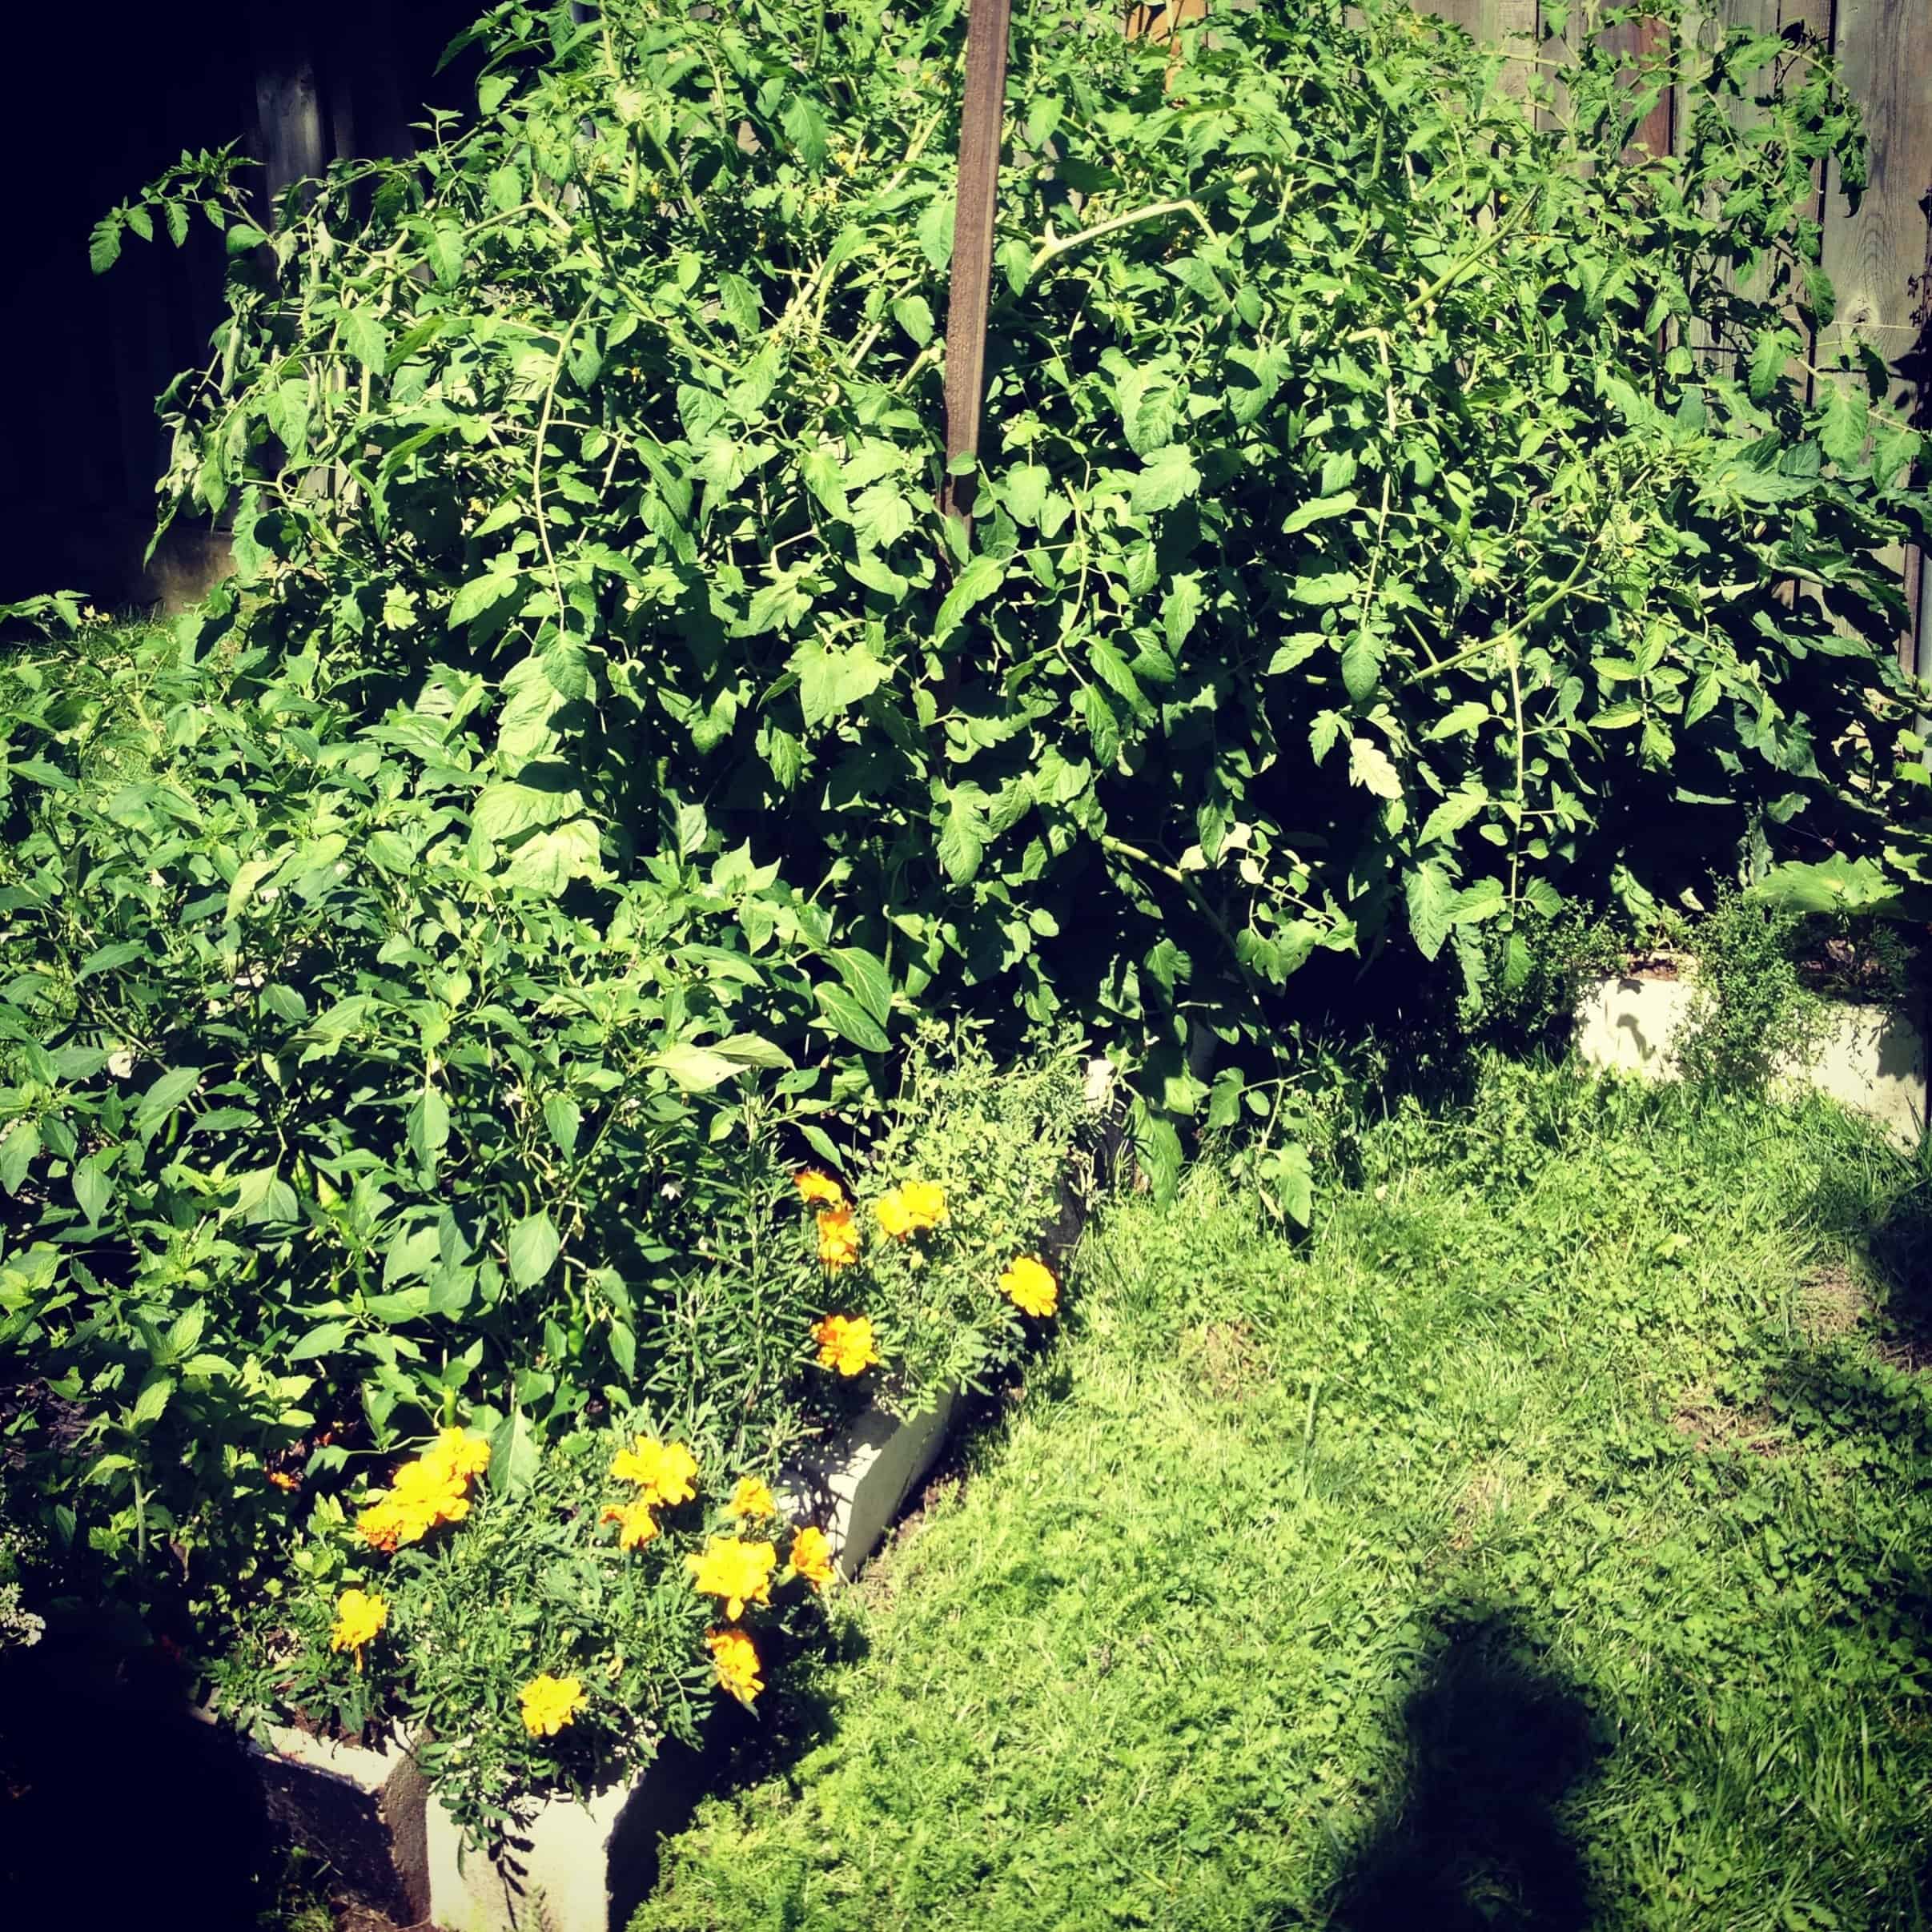 The tomato cages and stakes just didn't cut it, and now a big wooden stick is trying to hold mo monster tomatoes back from the peppers in front. Marigolds and sage are hiding in the cinder blocks under my tomato monster, and I think they'll have to accept that their "time in the sun" has passed. That corner will never see sun again.